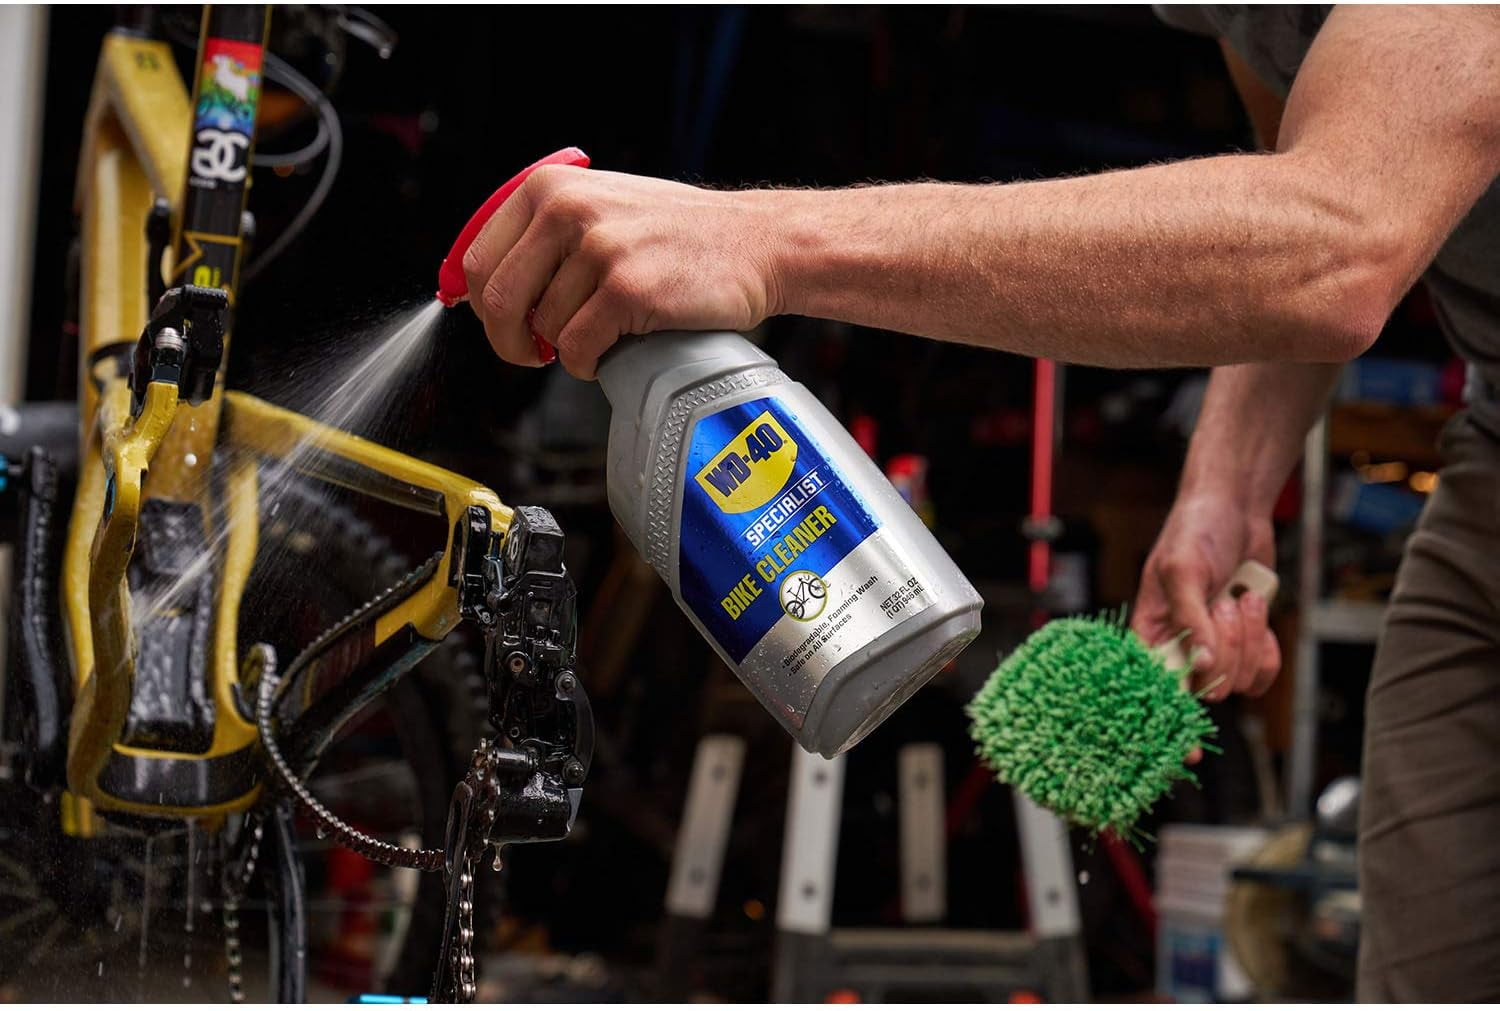 WD-40 (390340) Specialist Bike Cleaner, 32oz, foaming Trigger 4CT